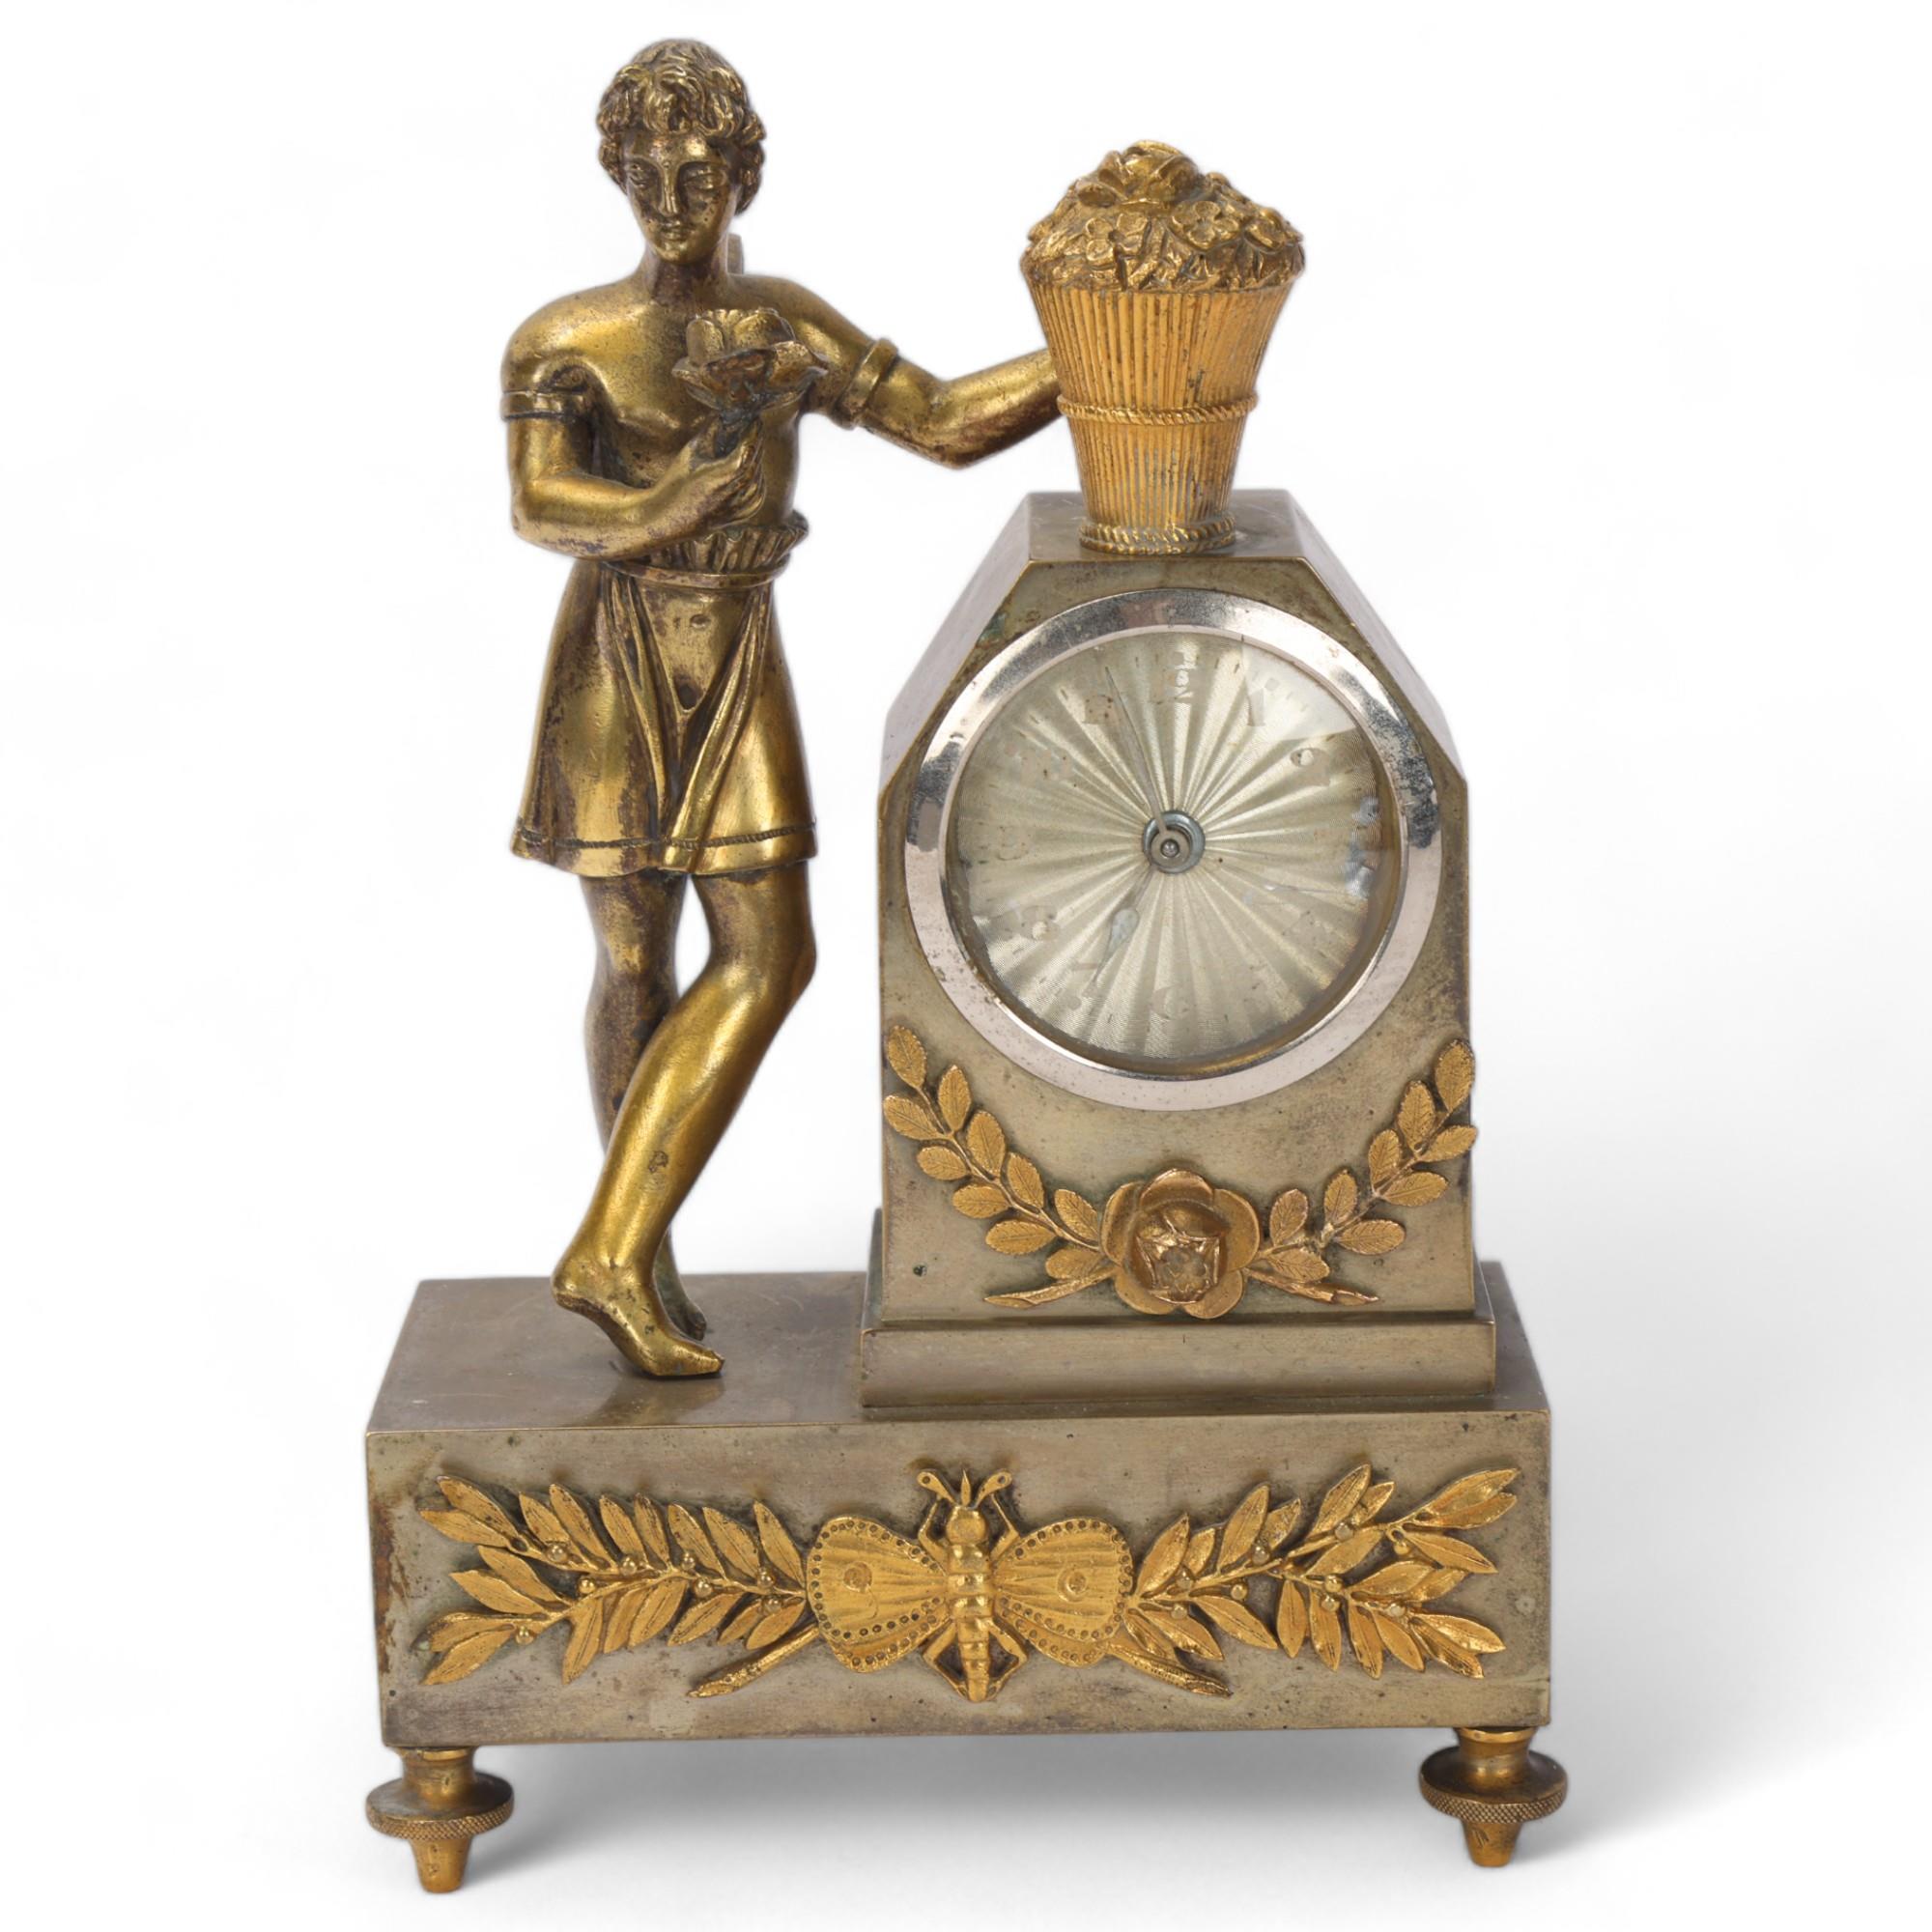 A French parcel-gilt bronze mounted 8-day mantel clock surmounted by an angel figure, spring